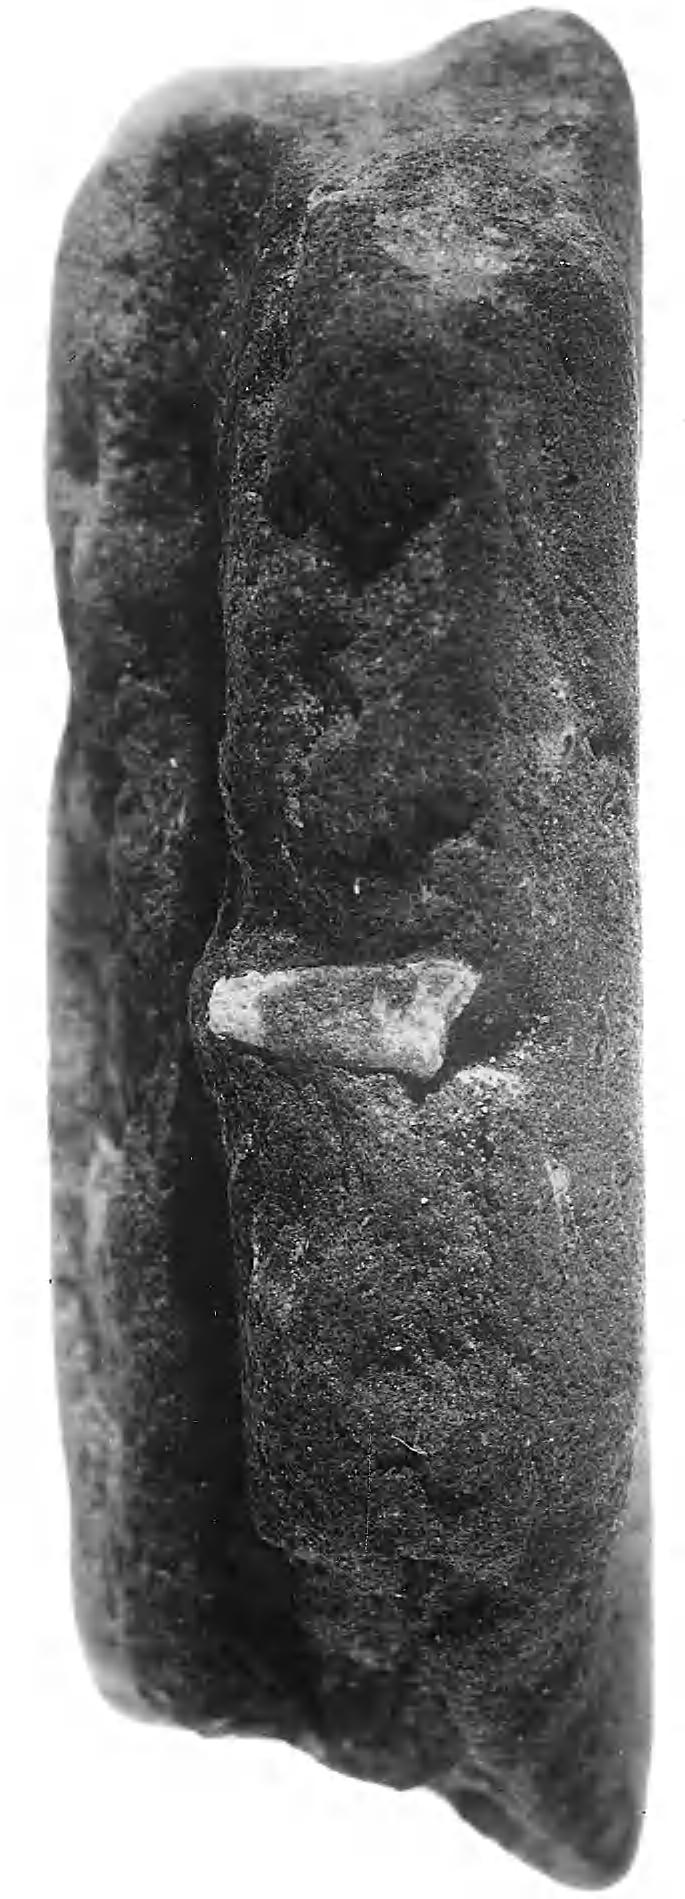 EVALUATIONS AND EXCAVATIONS SOUTH-EAST OF TEWKESBURY 1991 7 65 Fig. 18. Fragment of spear mould with chaplet in situ (scale 5:1). Copyright British Museum.